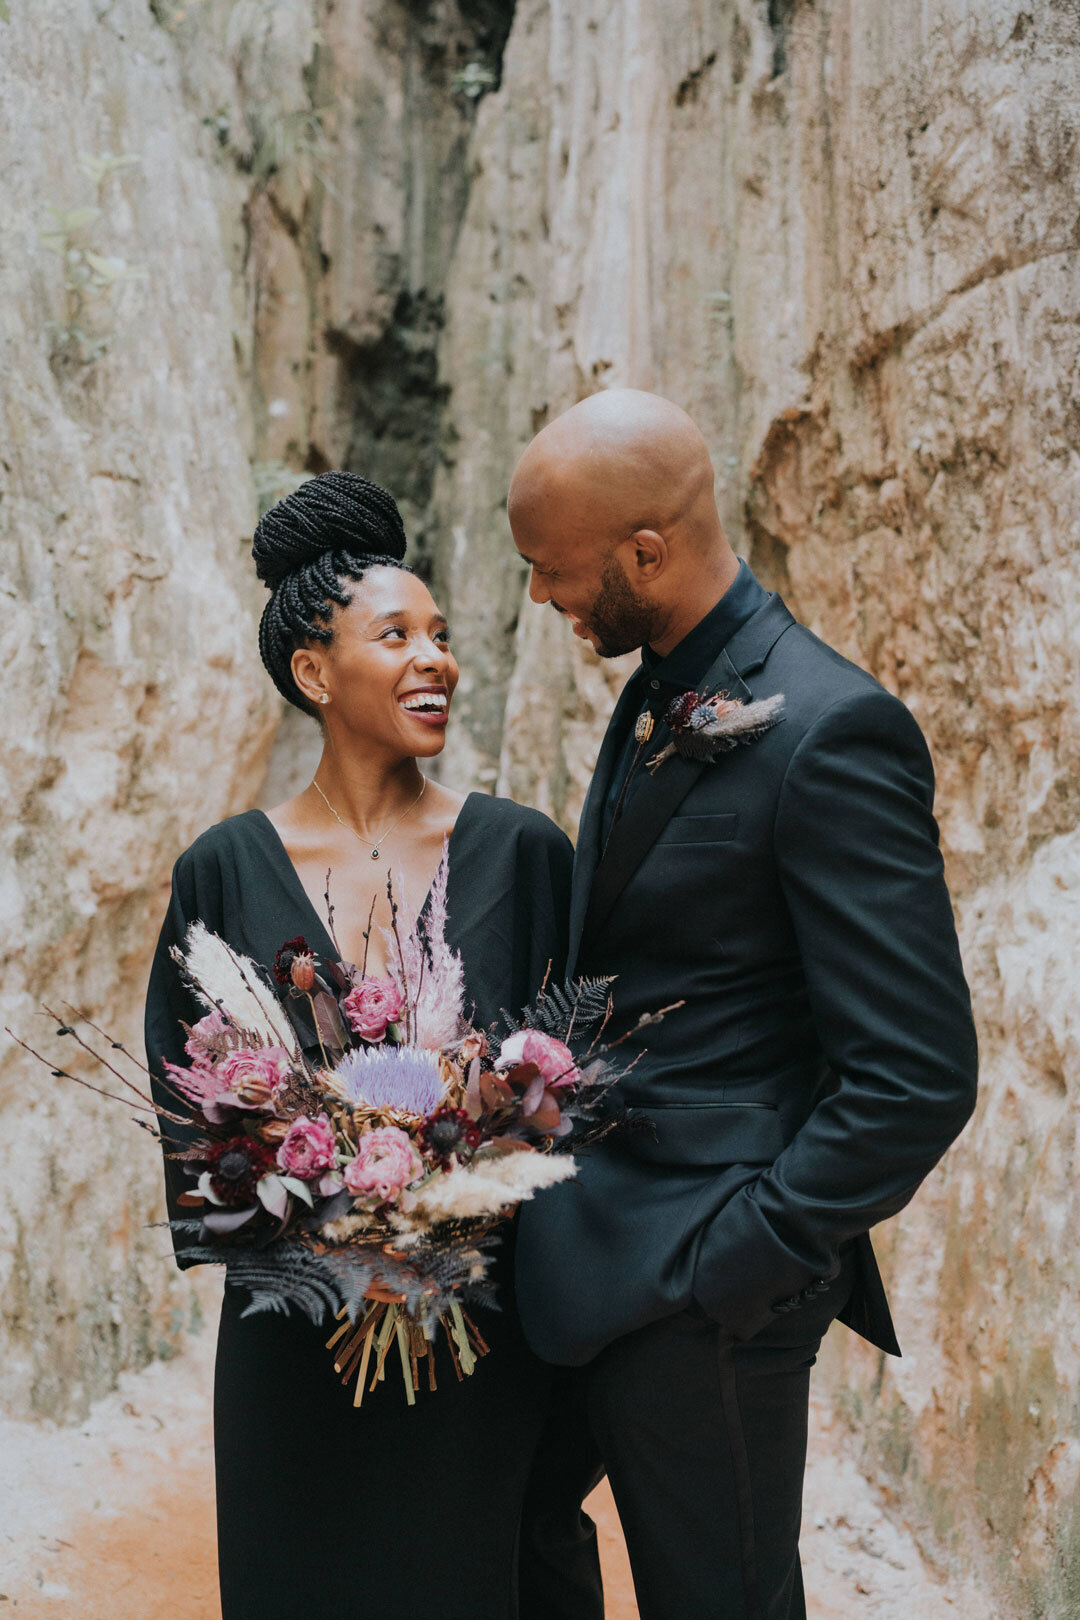 Black couple wearing black outfits holding pink bouquet